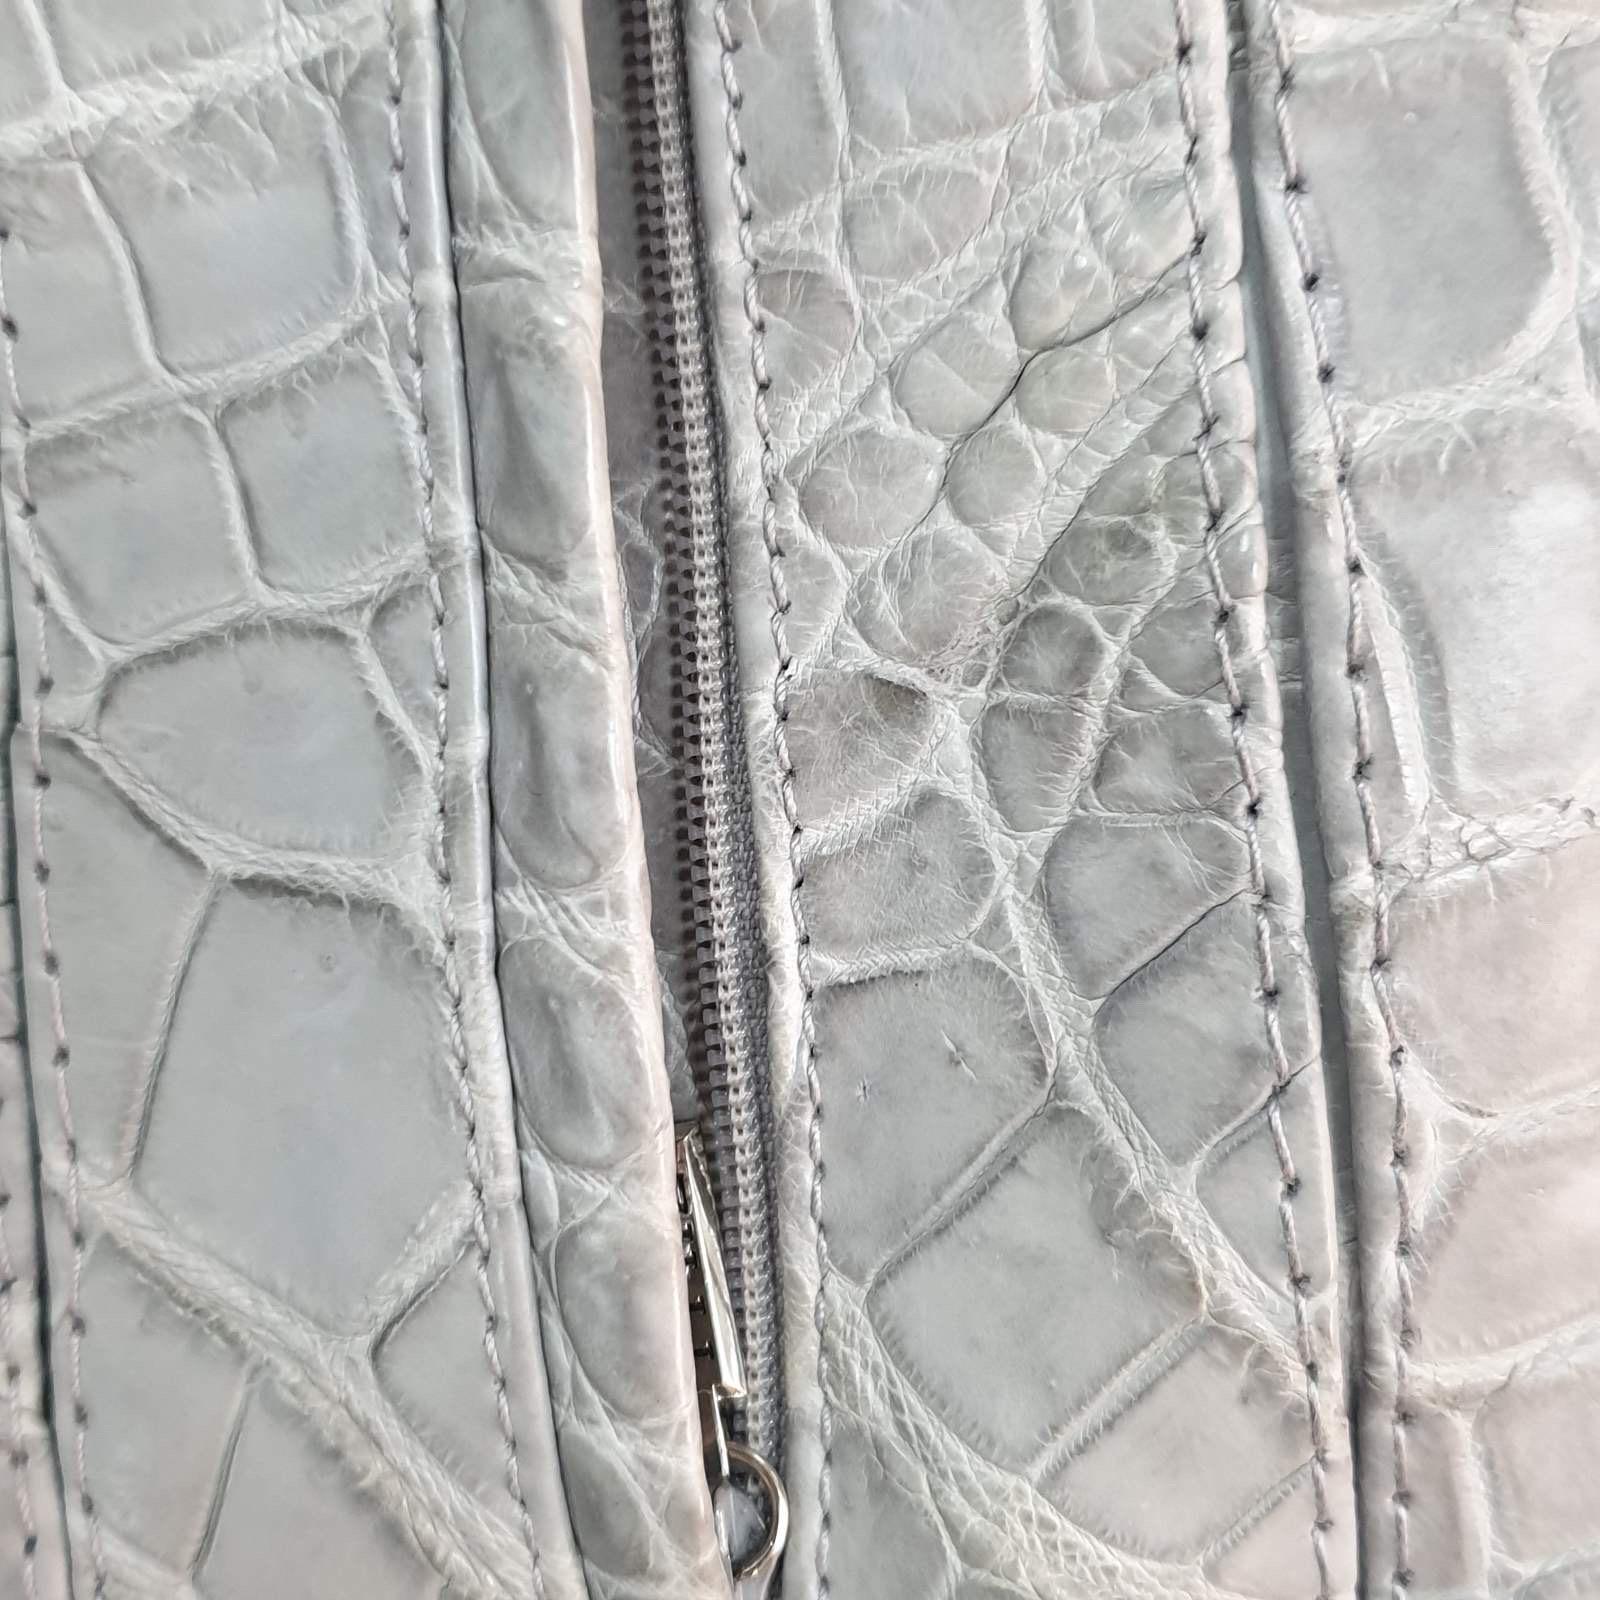 Zilly Gray Crocodile Leather Jacket For Sale 6